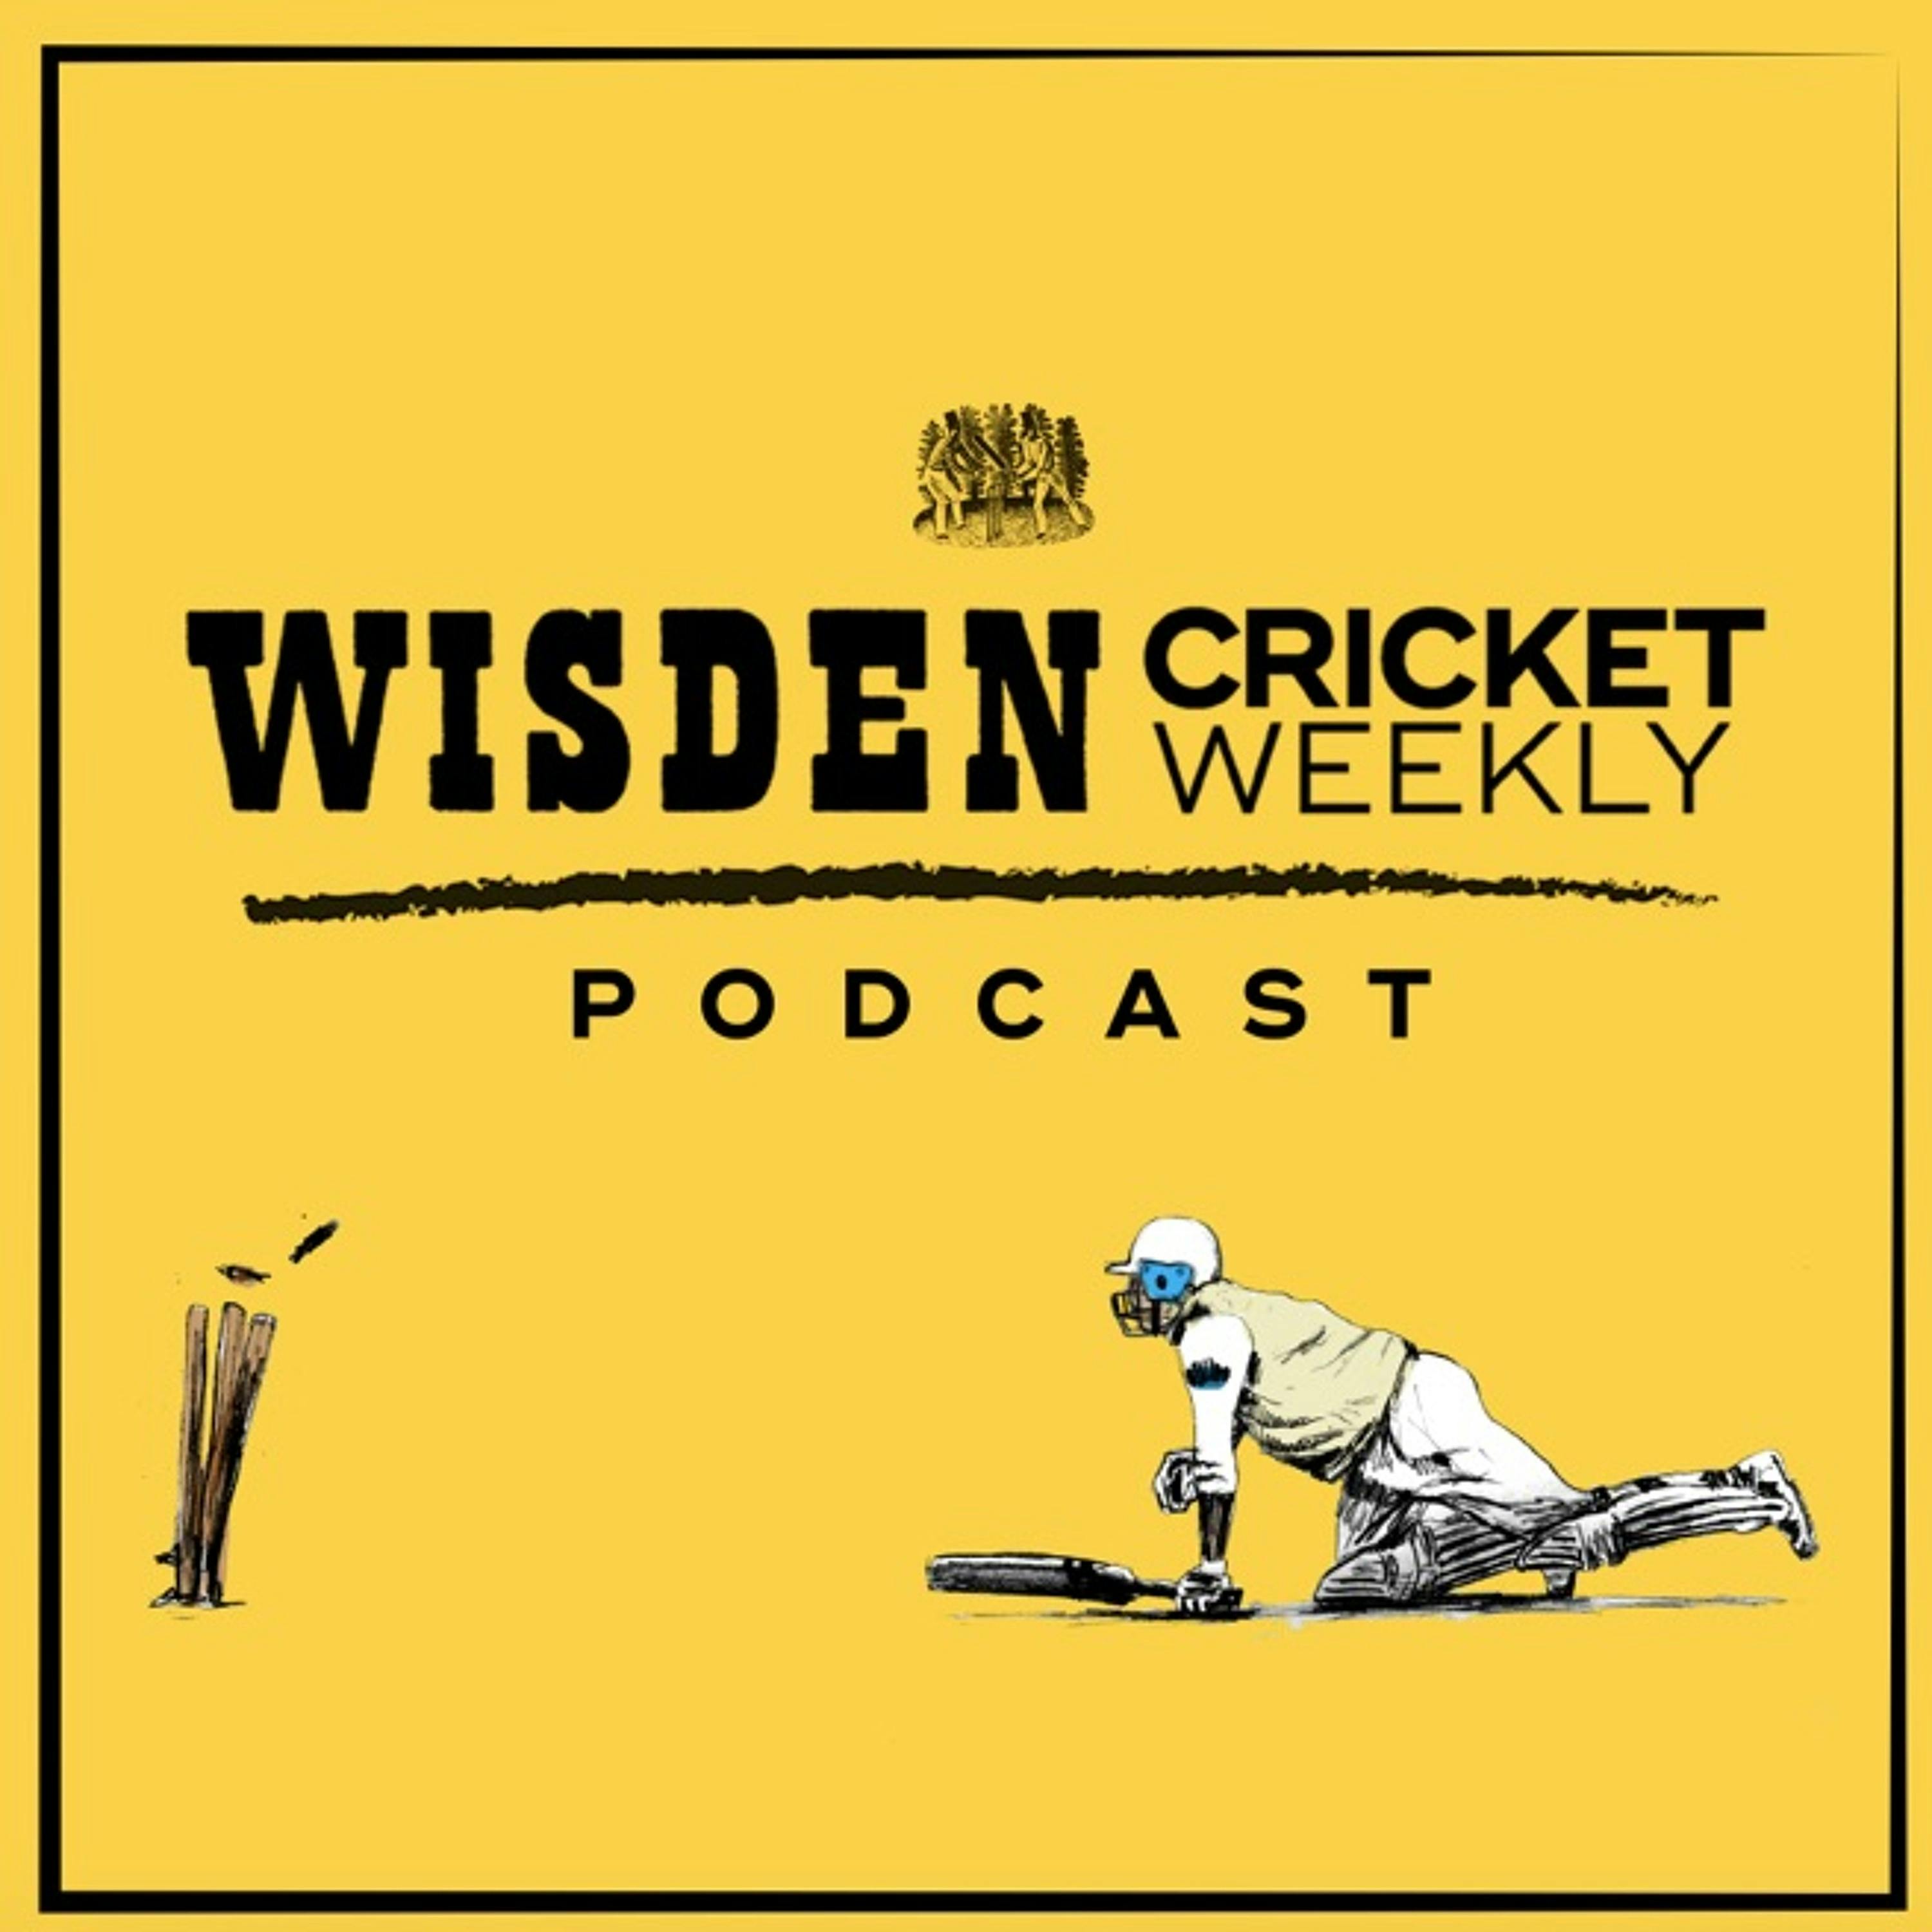 Episode 5 - The Sam Curran Experience